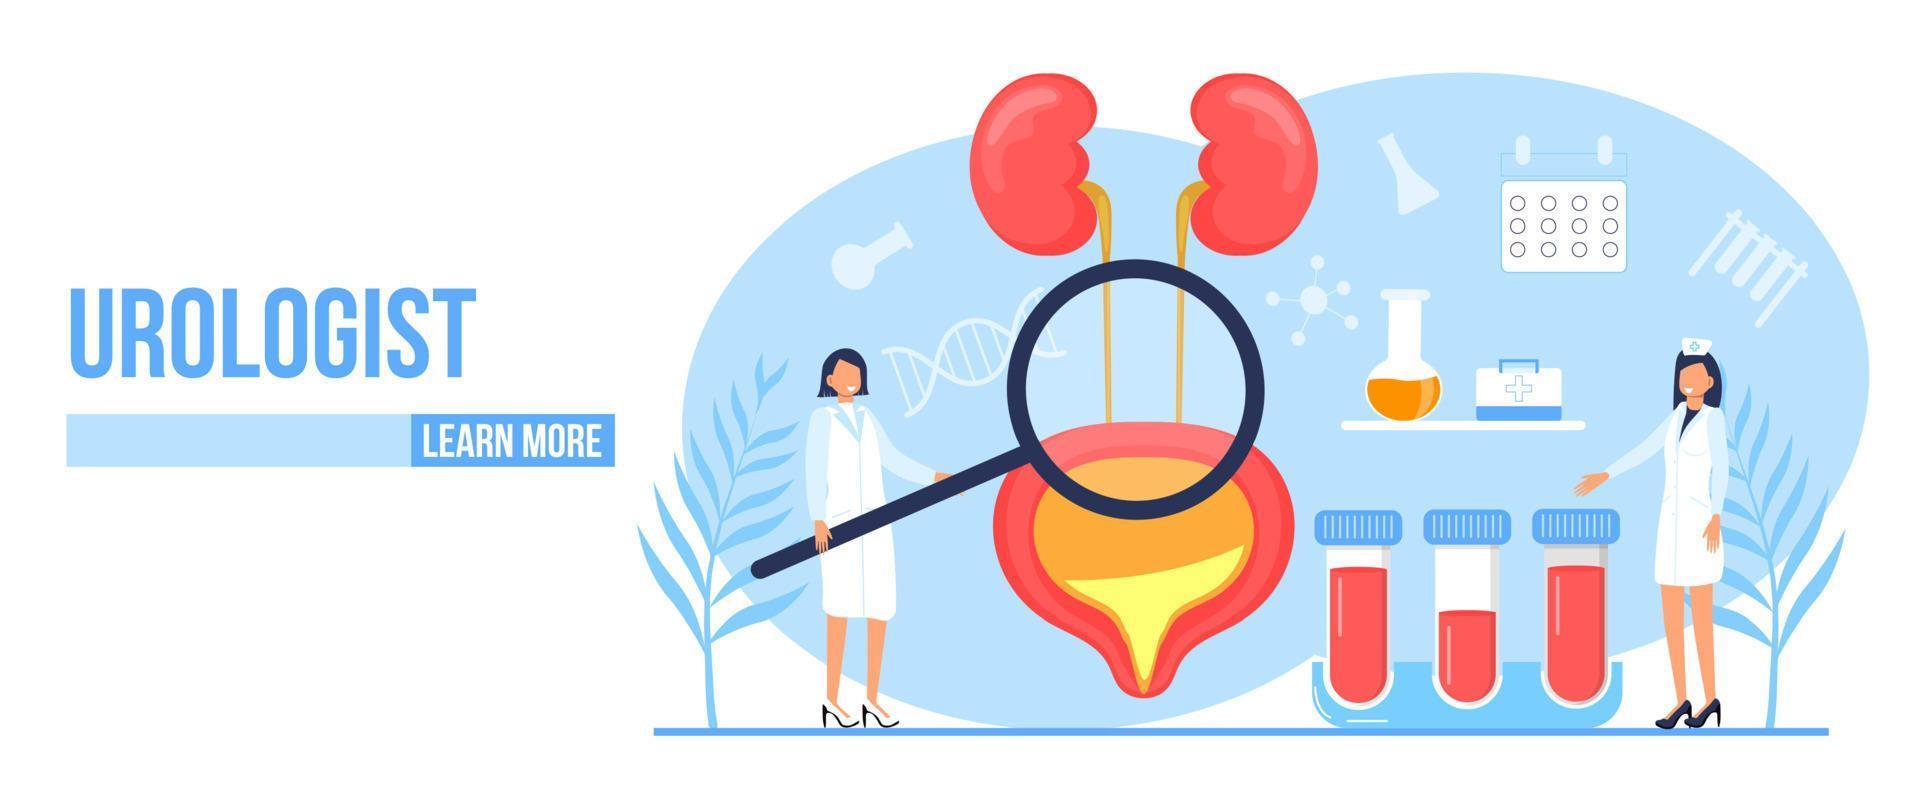 Urologist, nephropathy concept vector. Tiny doctors treat kidneys. Pyelonephritis and kidney stones diseases are shown. Renal failure illustration for website vector